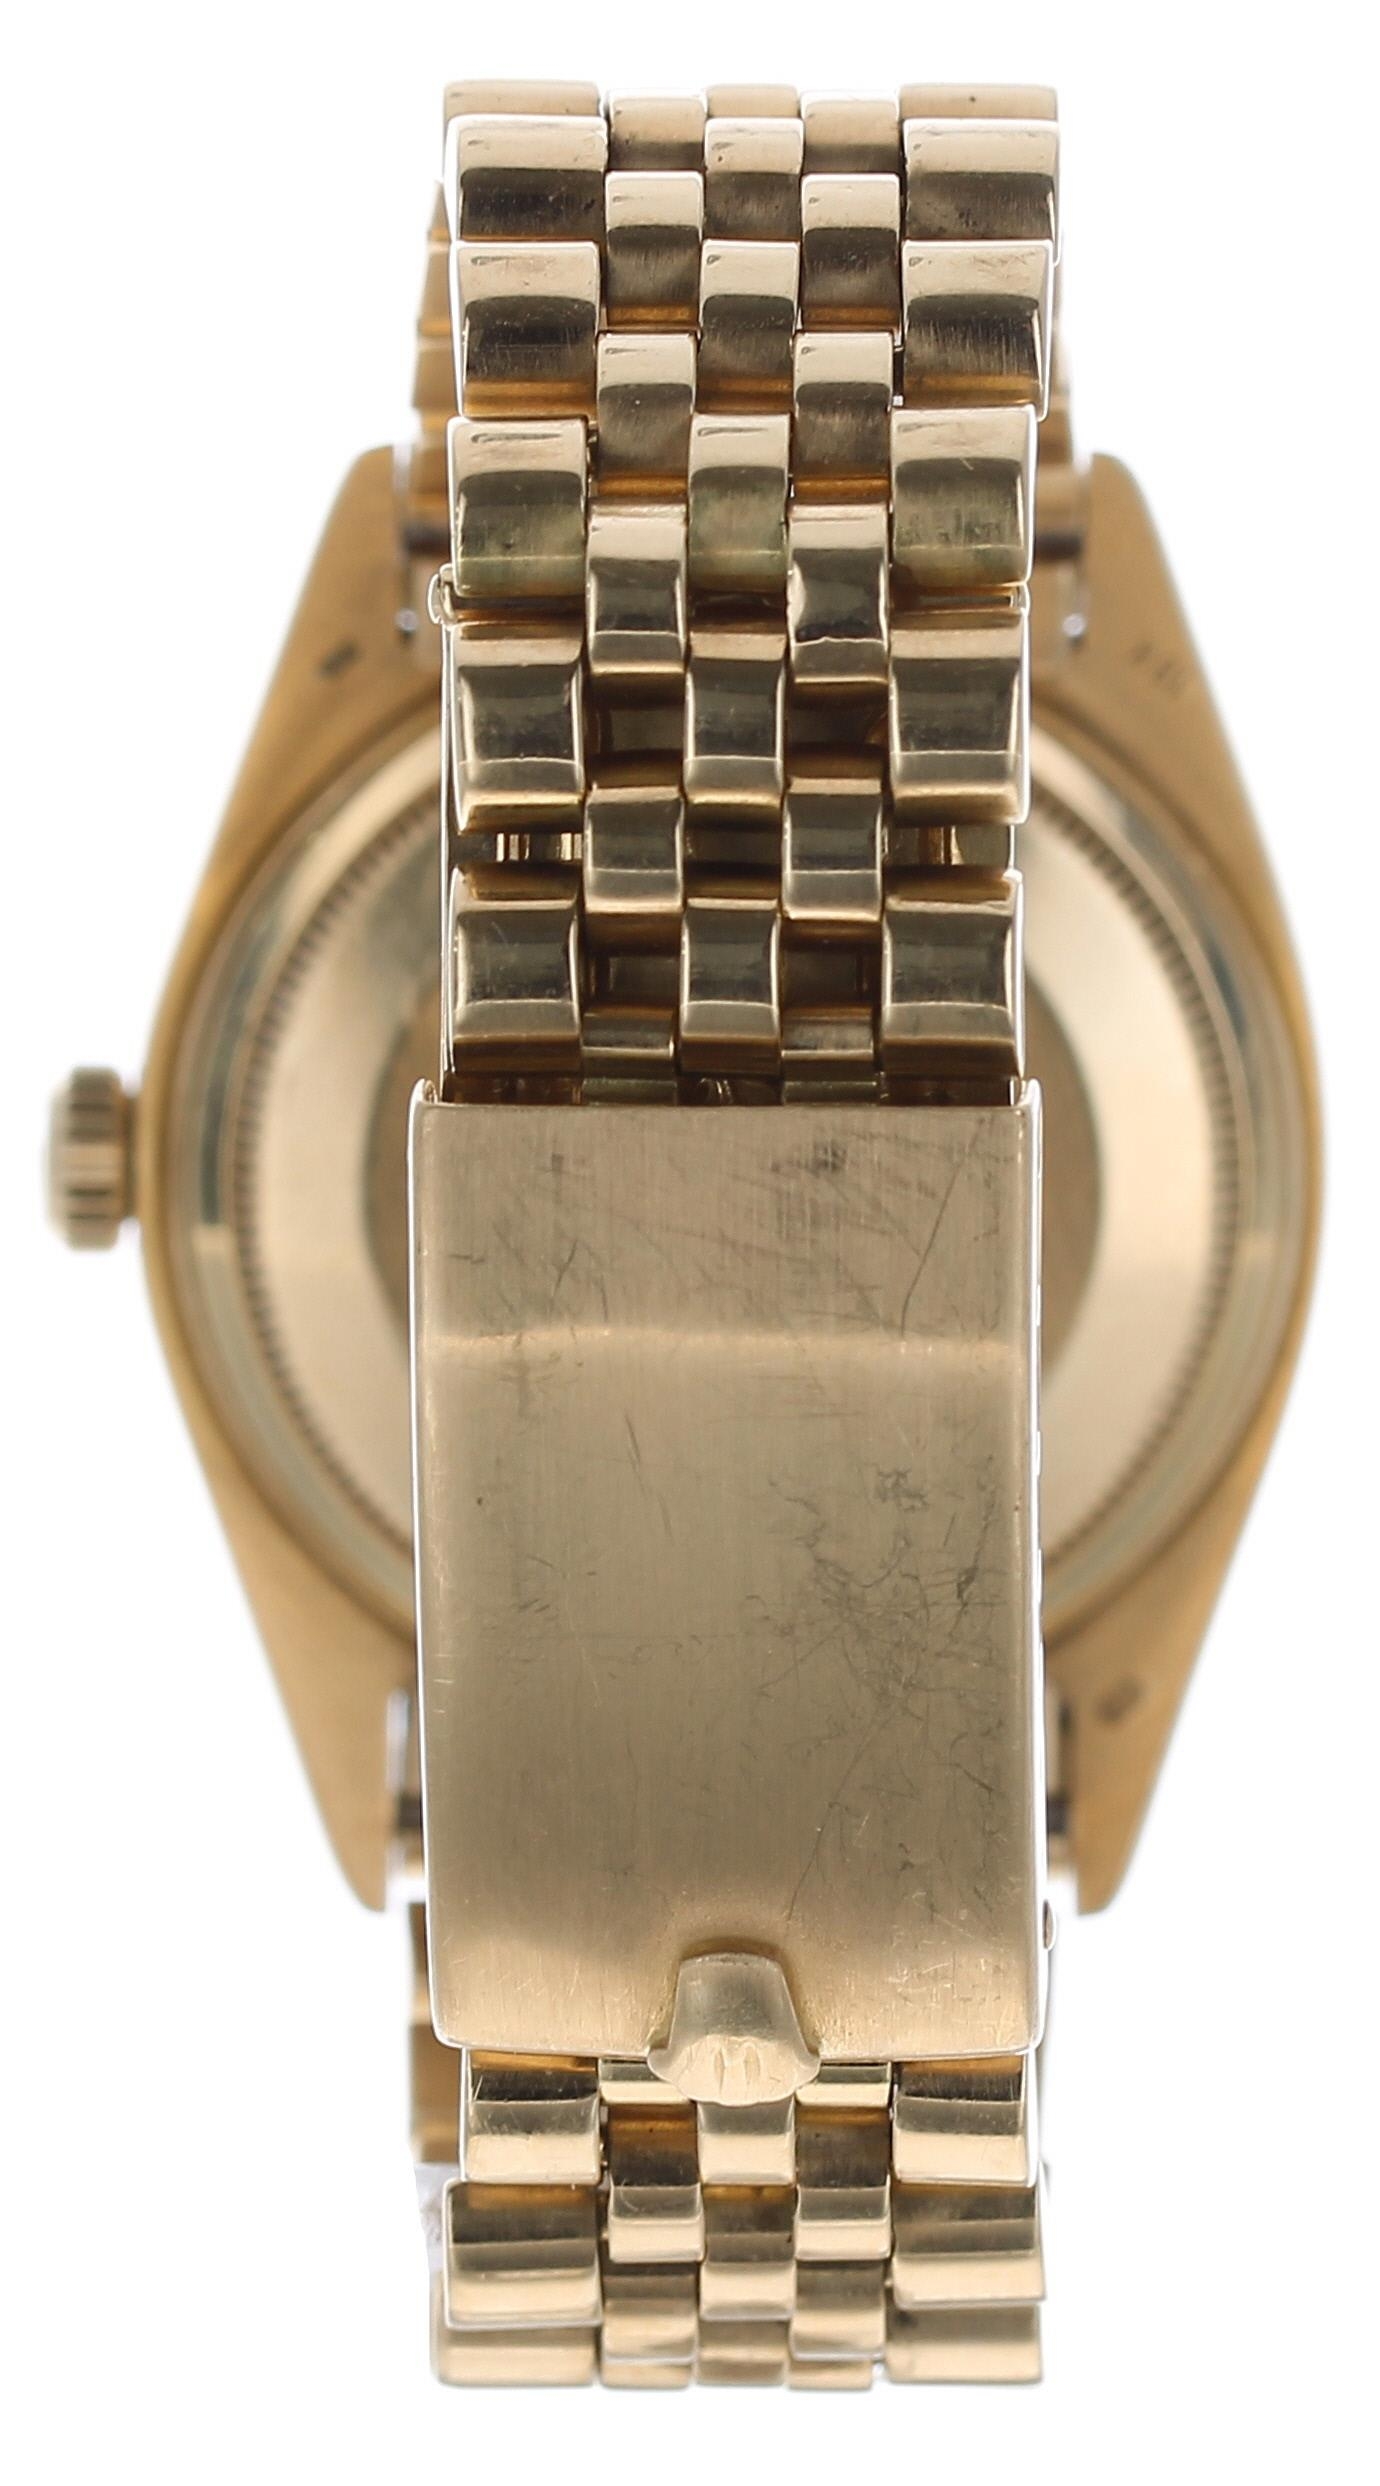 Rolex Oyster Perpetual Datejust 18ct gentleman's wristwatch, reference no. 16018, serial no. - Image 4 of 5